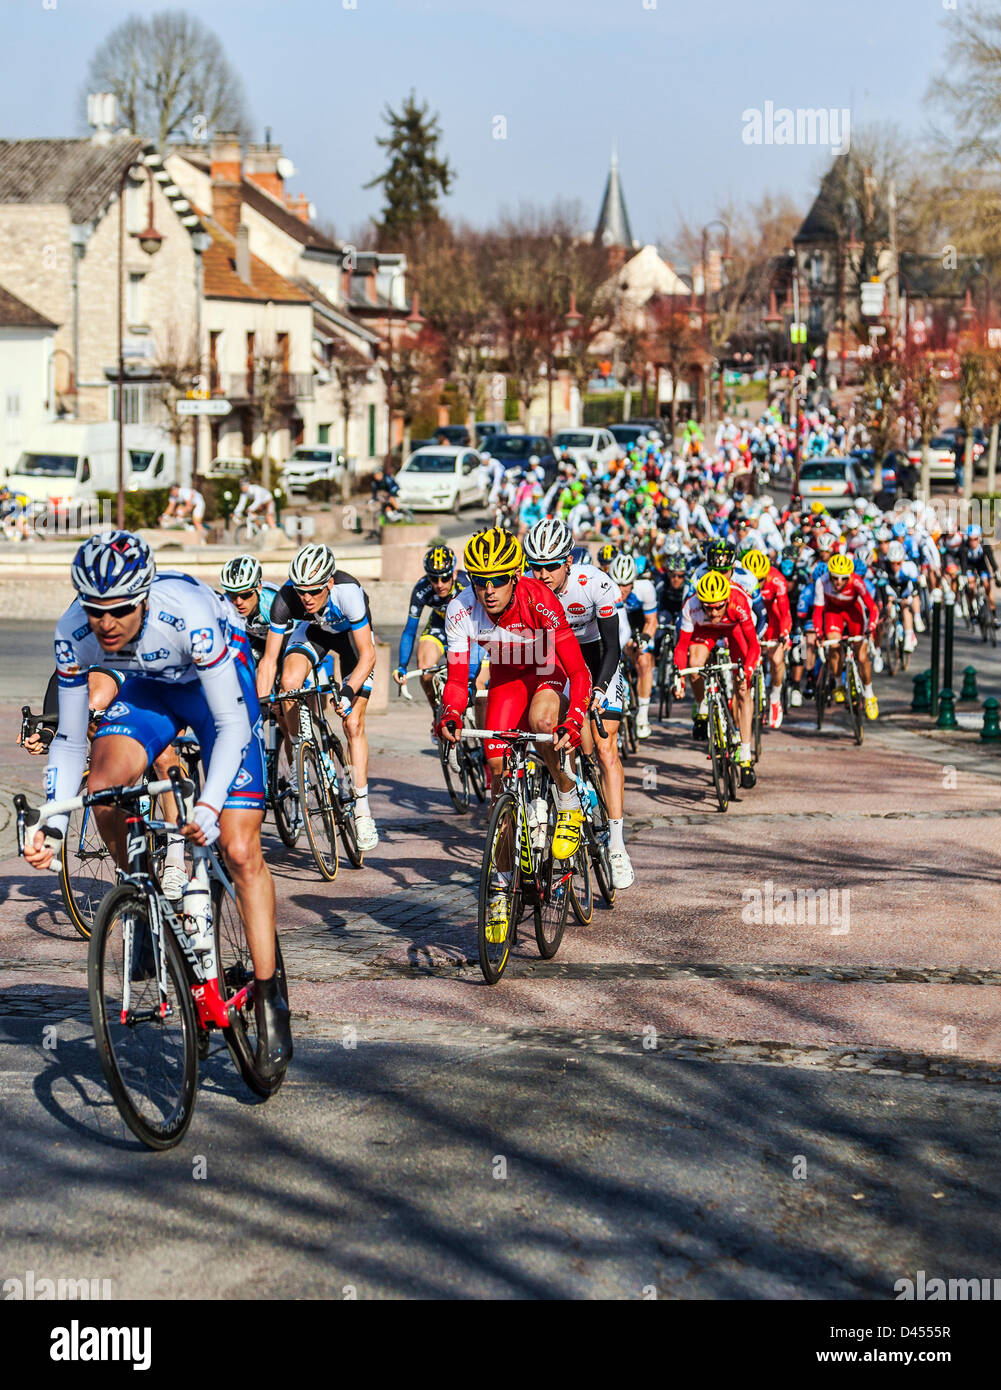 Saint-Pierre-lès-Nemours, France. 4th March 2013.  Image of the peloton riding fastly, during the first stage of the famous road bicycle race Paris-Nice, on March 4, 2013 in Saint-Pierre-lès-Nemours. Credit:  Radu Razvan / Alamy Live News Stock Photo